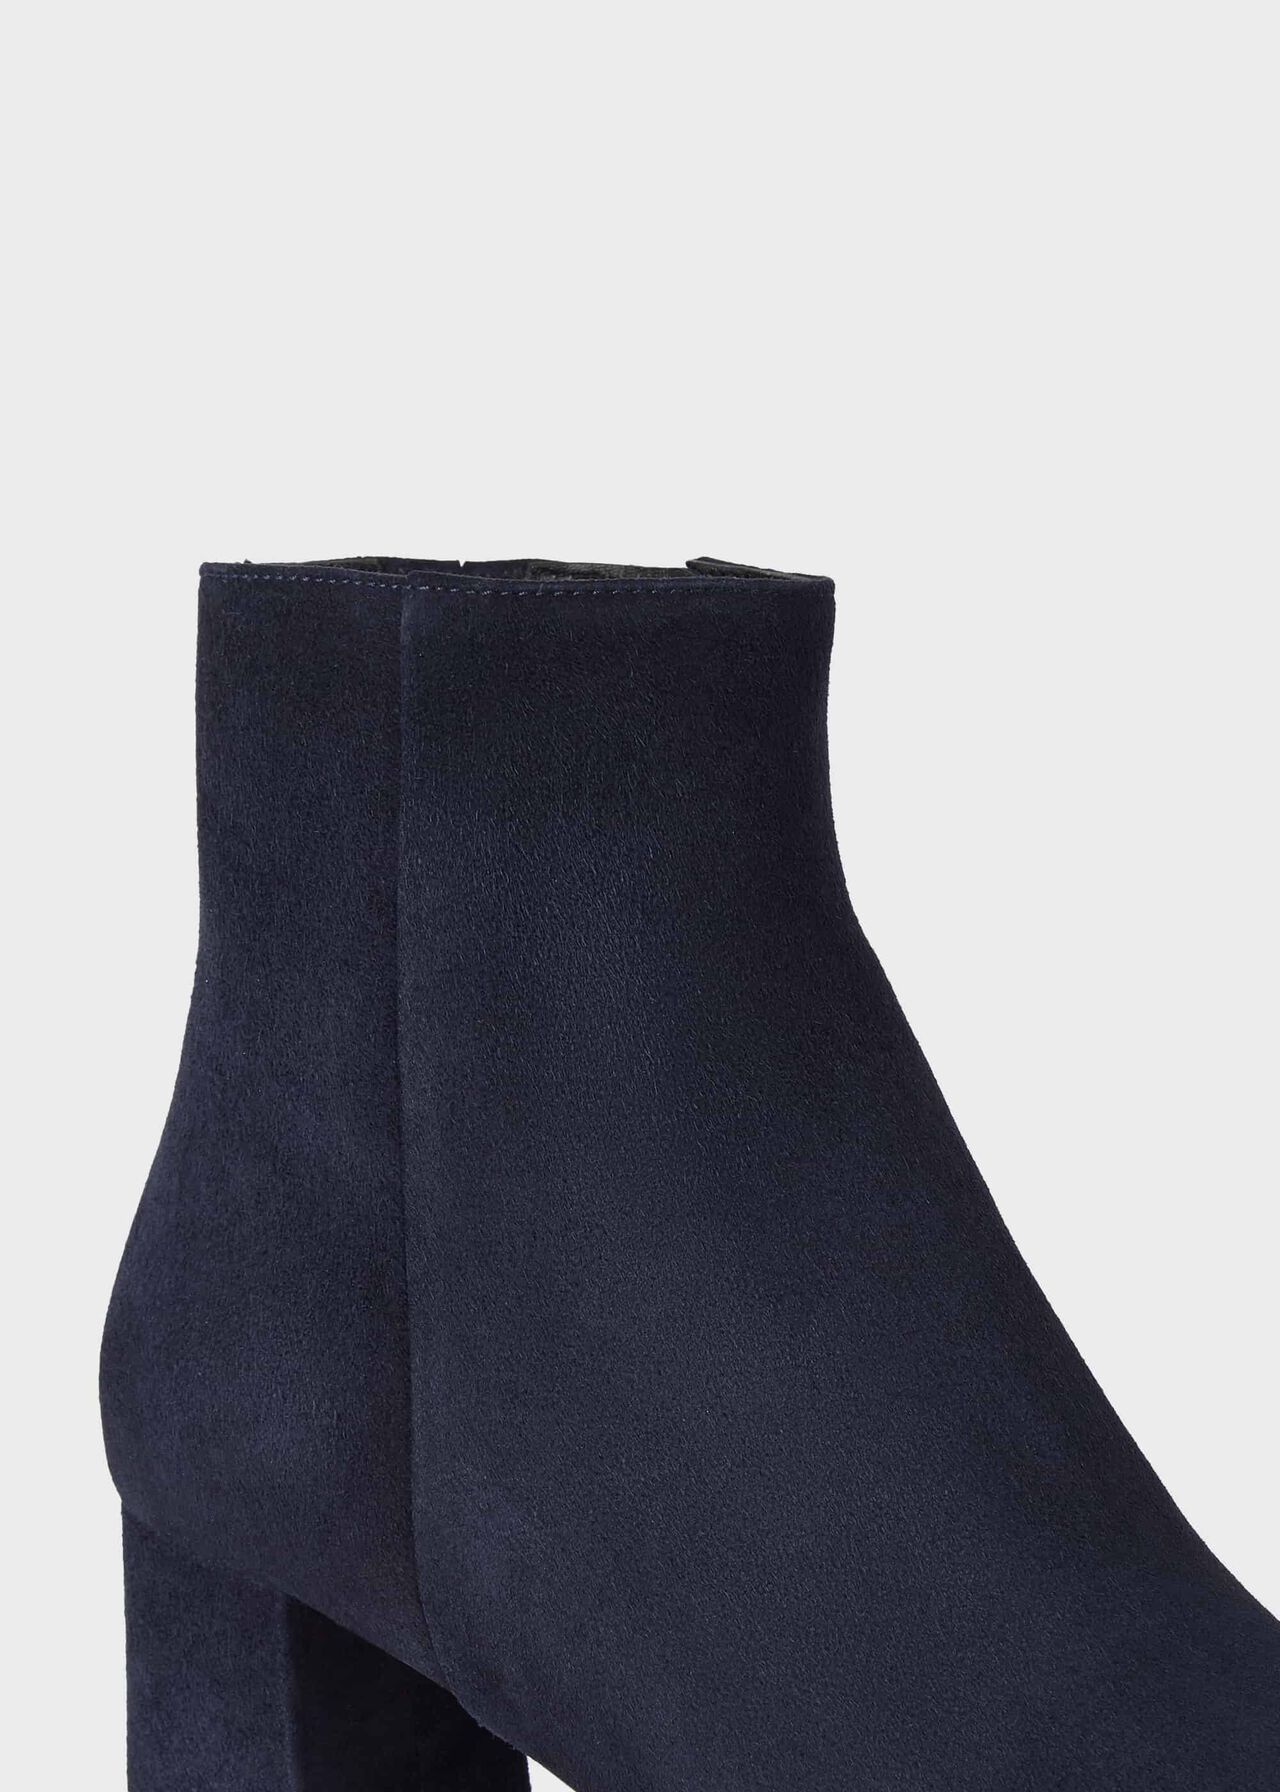 Imogen Leather Ankle Boots, Navy, hi-res